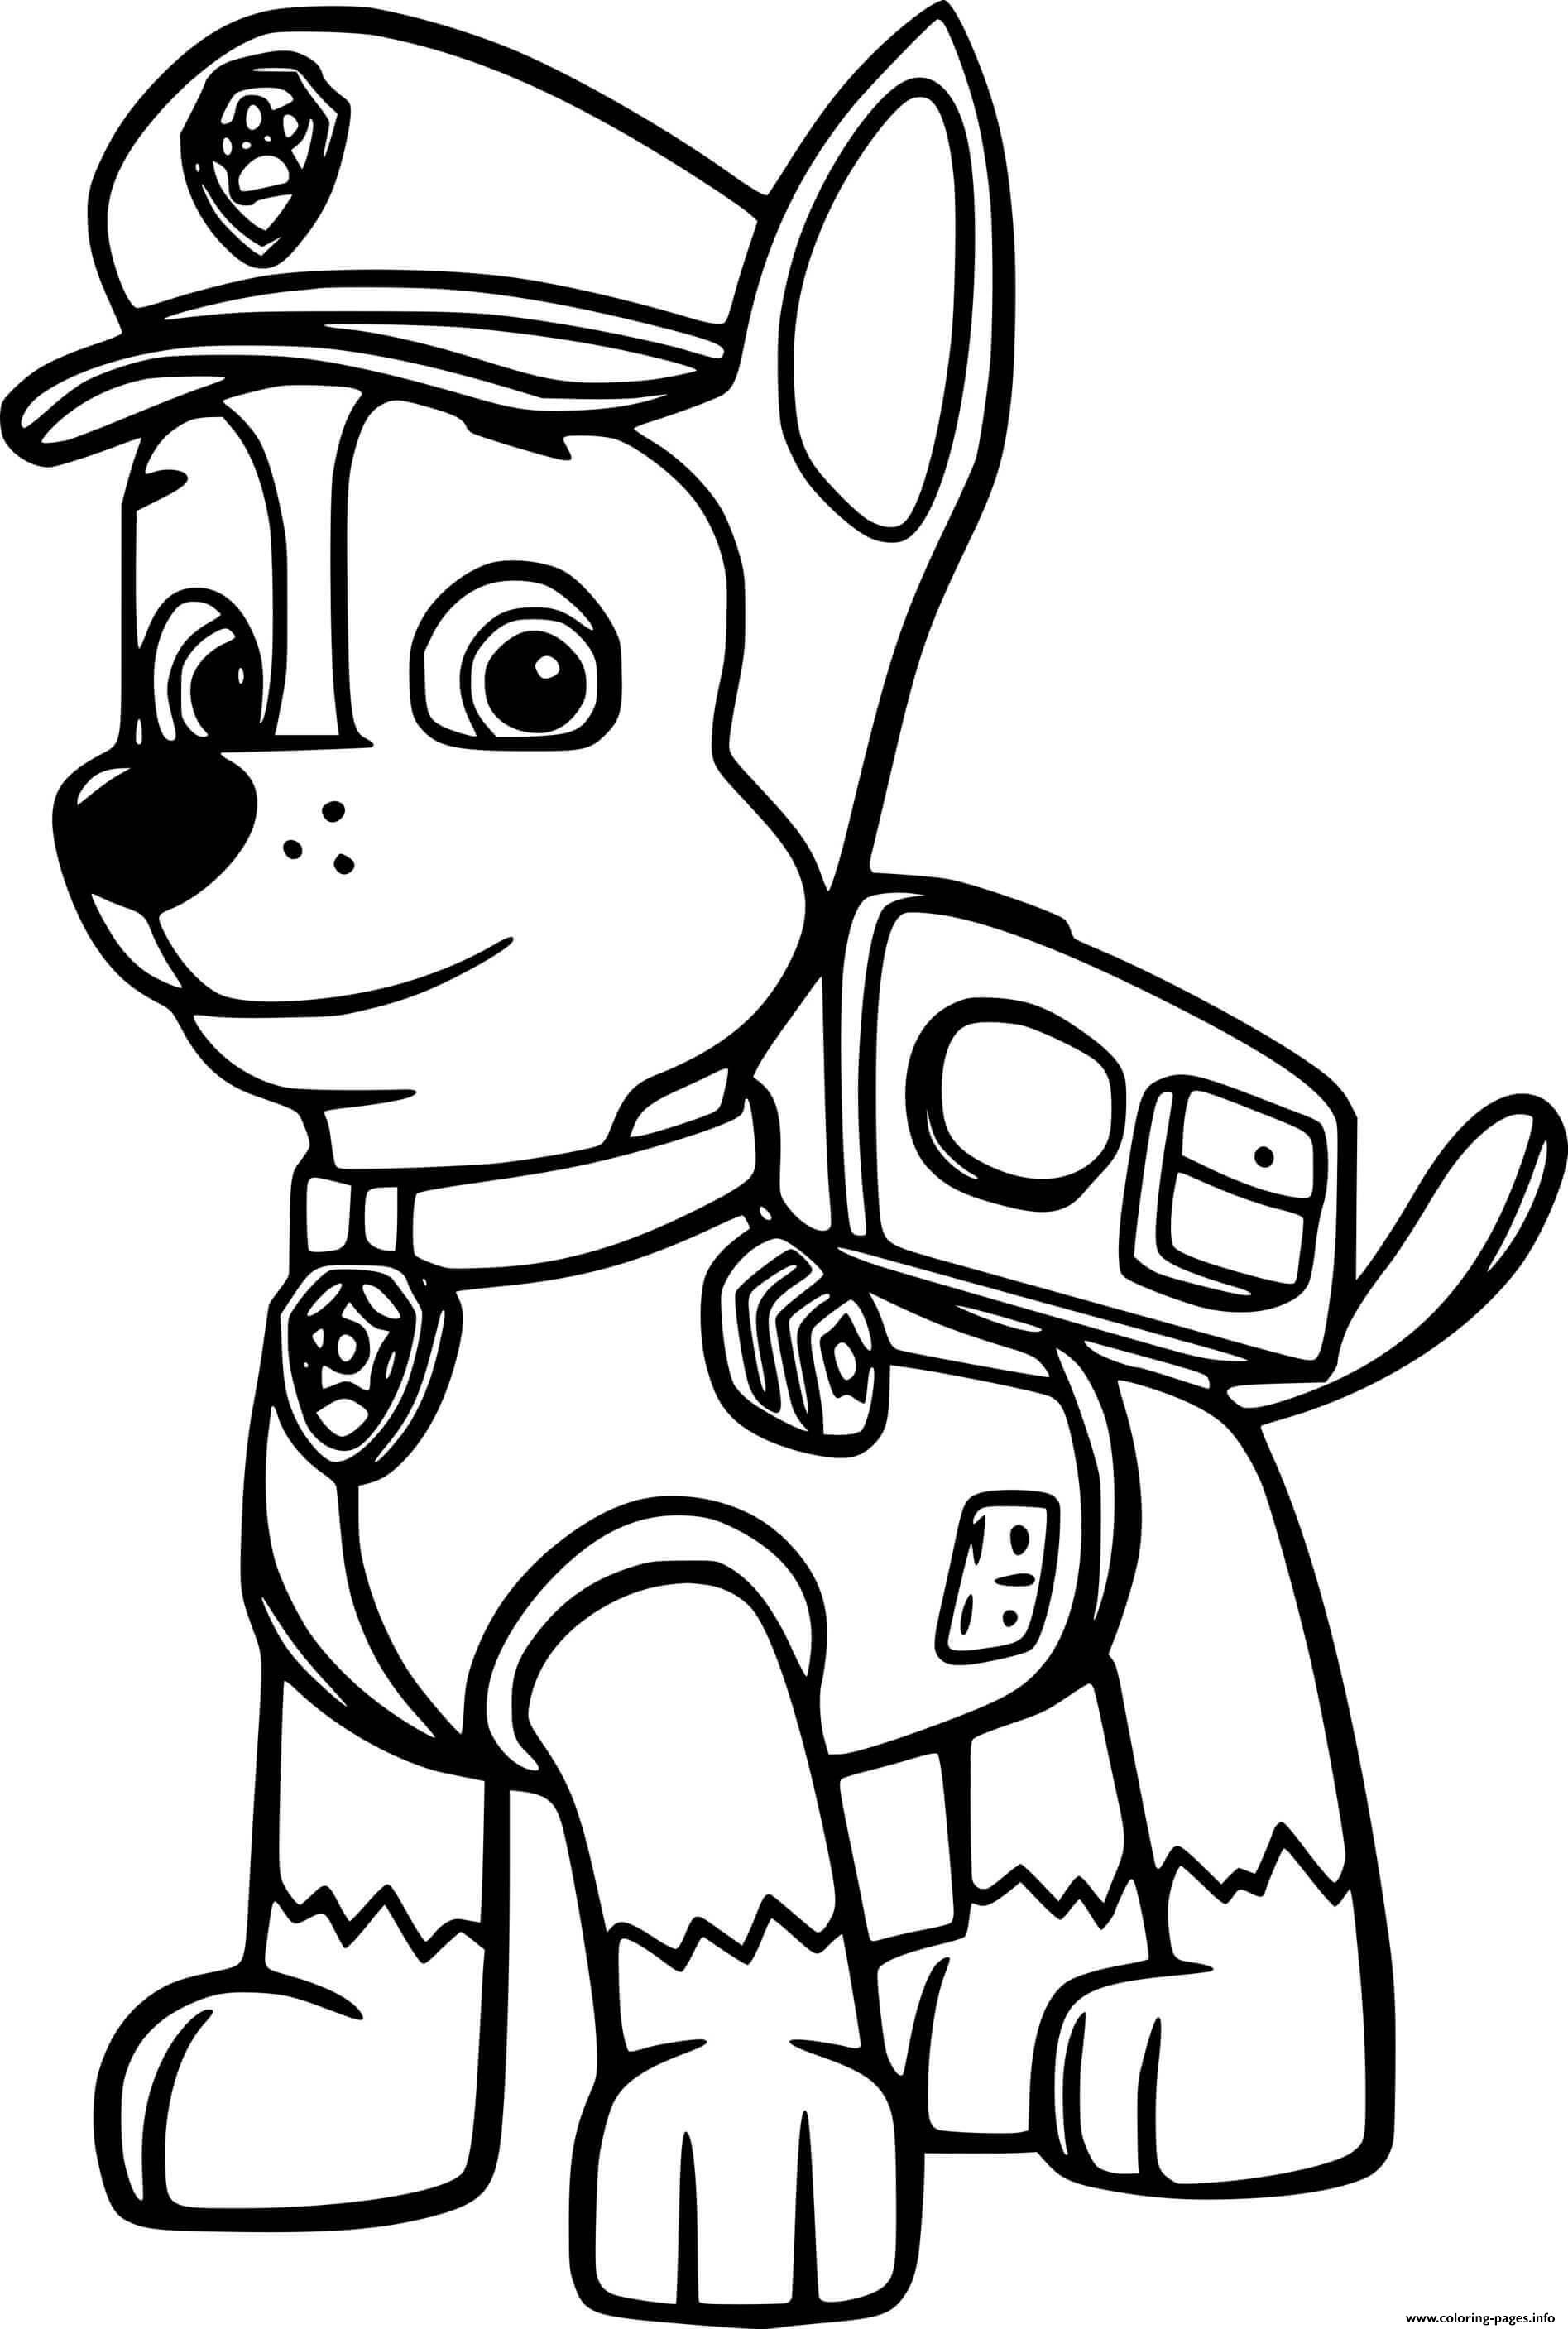 Simple Chase From Paw Patrol coloring